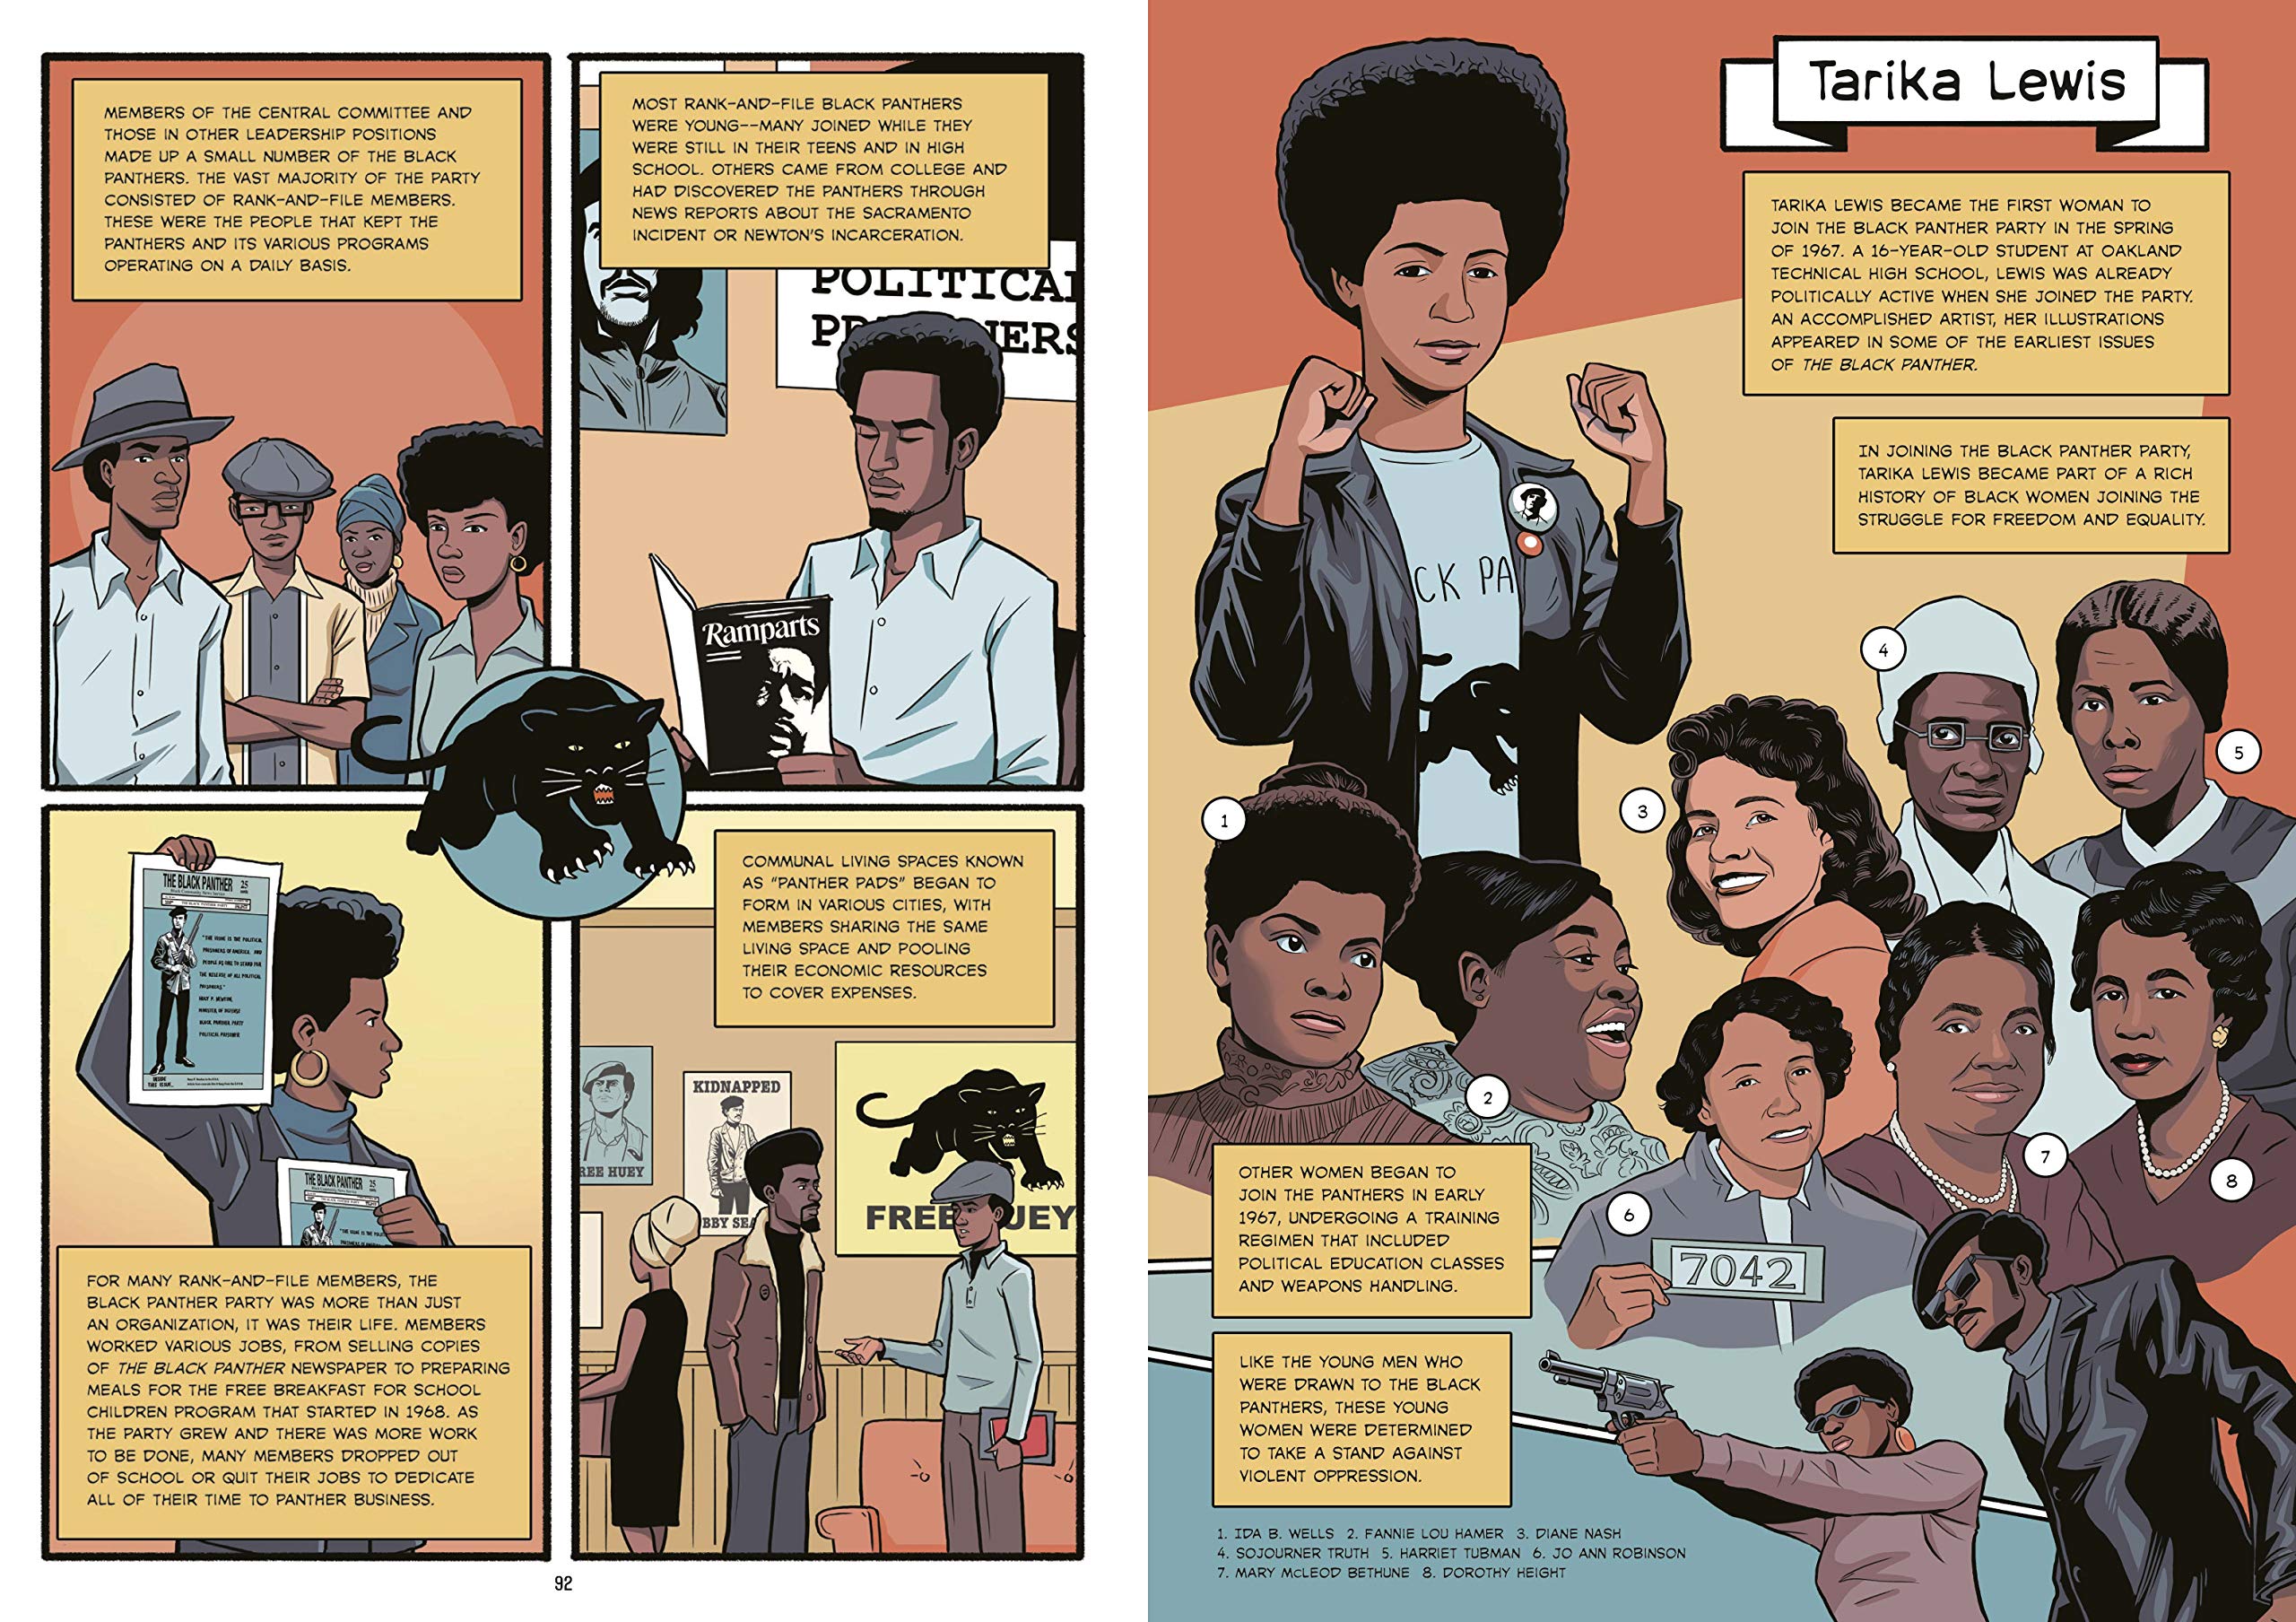 The Black Panther Party: A Graphic Novel History - David F. Walker, Marcus Kwame Anderson (Authors)